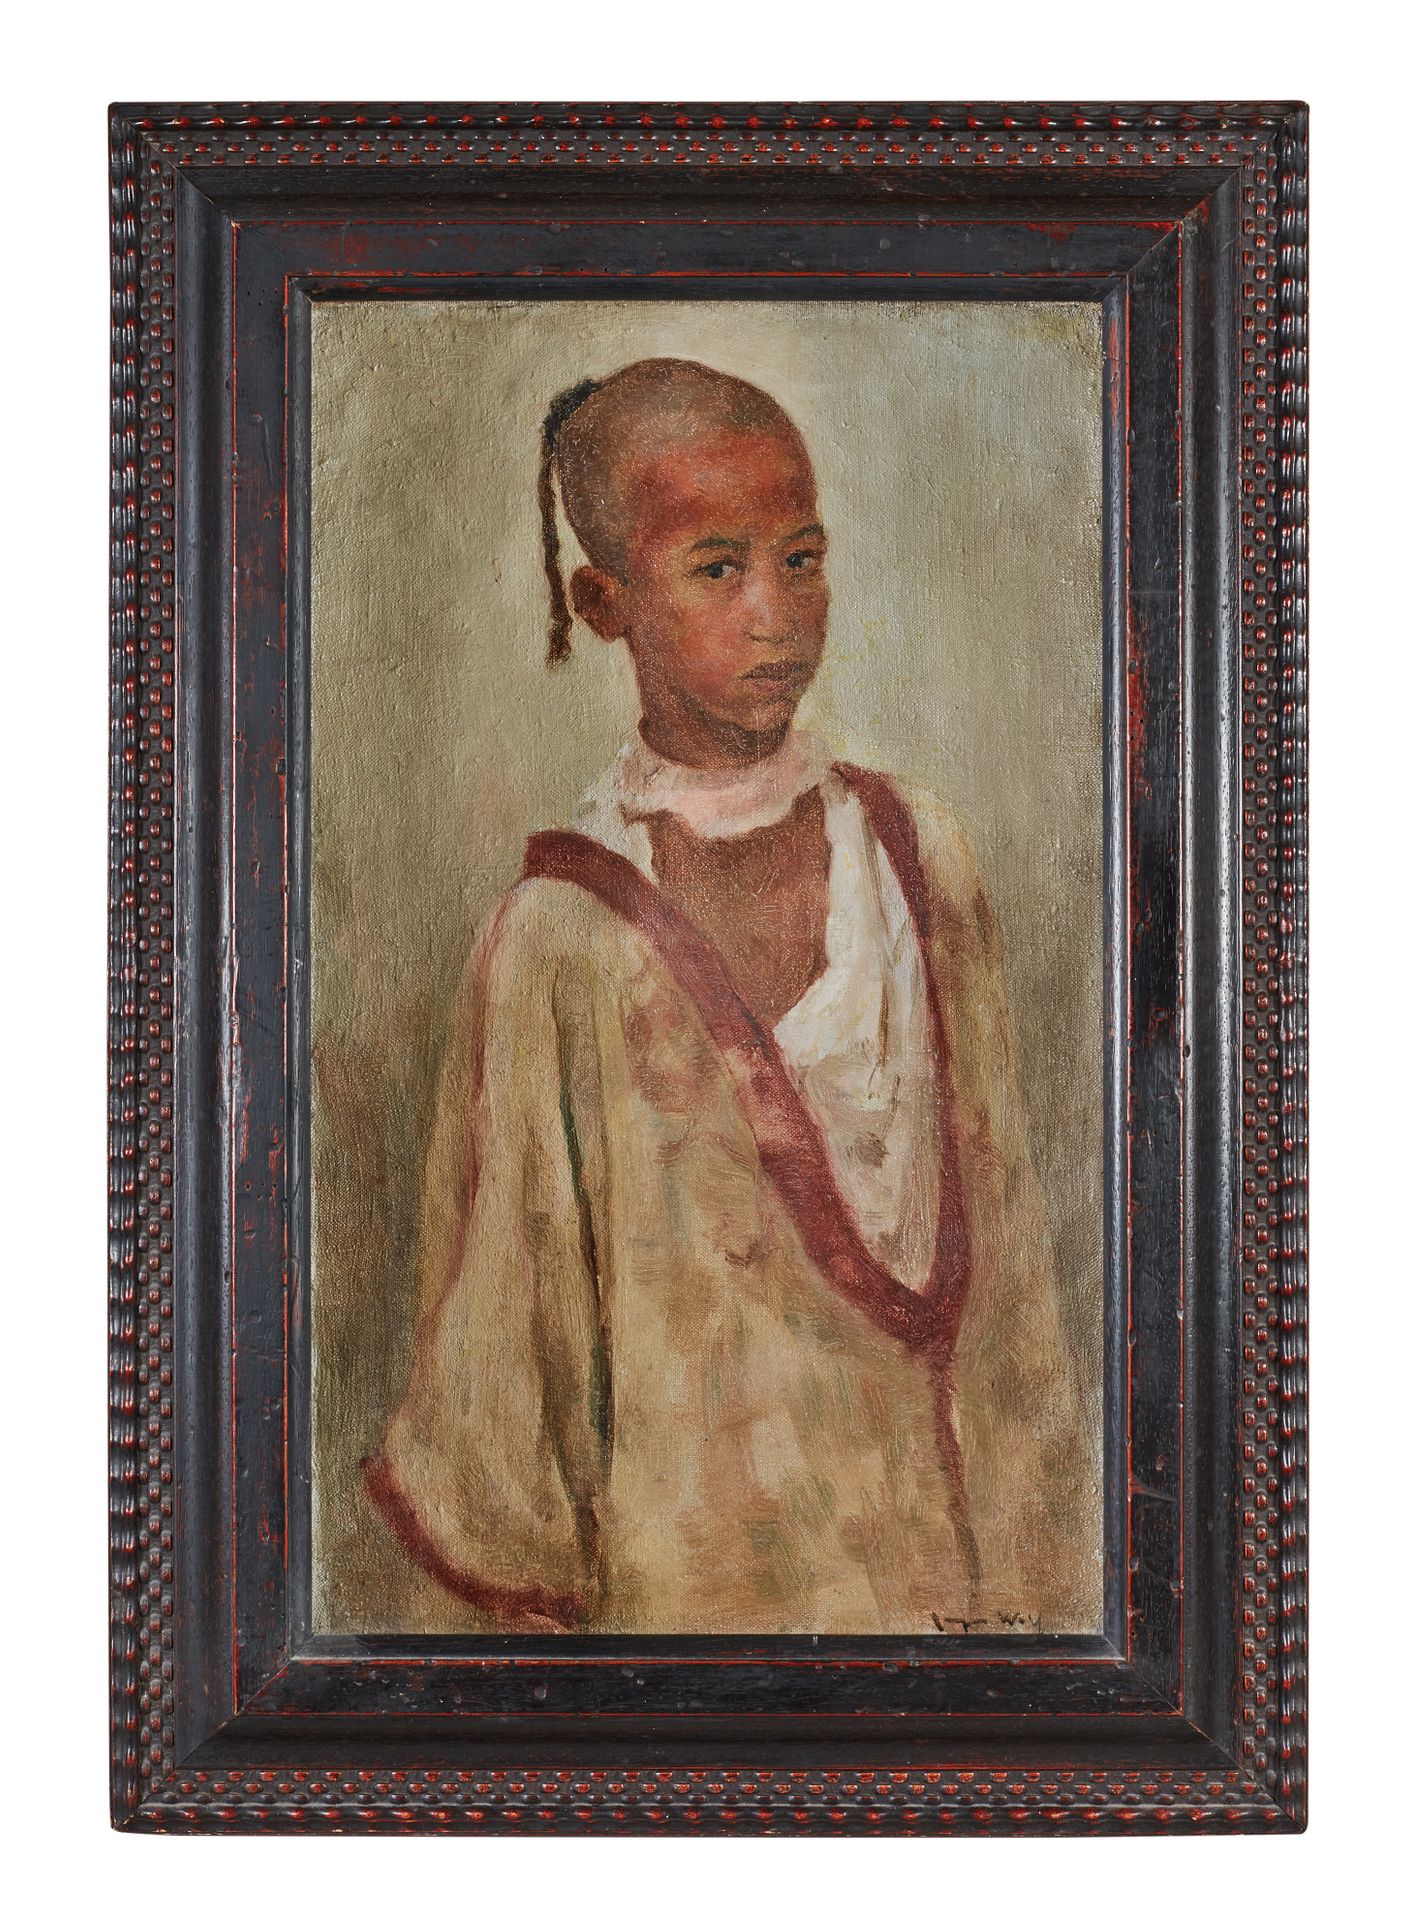 Null Francisque NOAILLY (1855-1942)

Portrait of an Arab child

Cardboard signed&hellip;